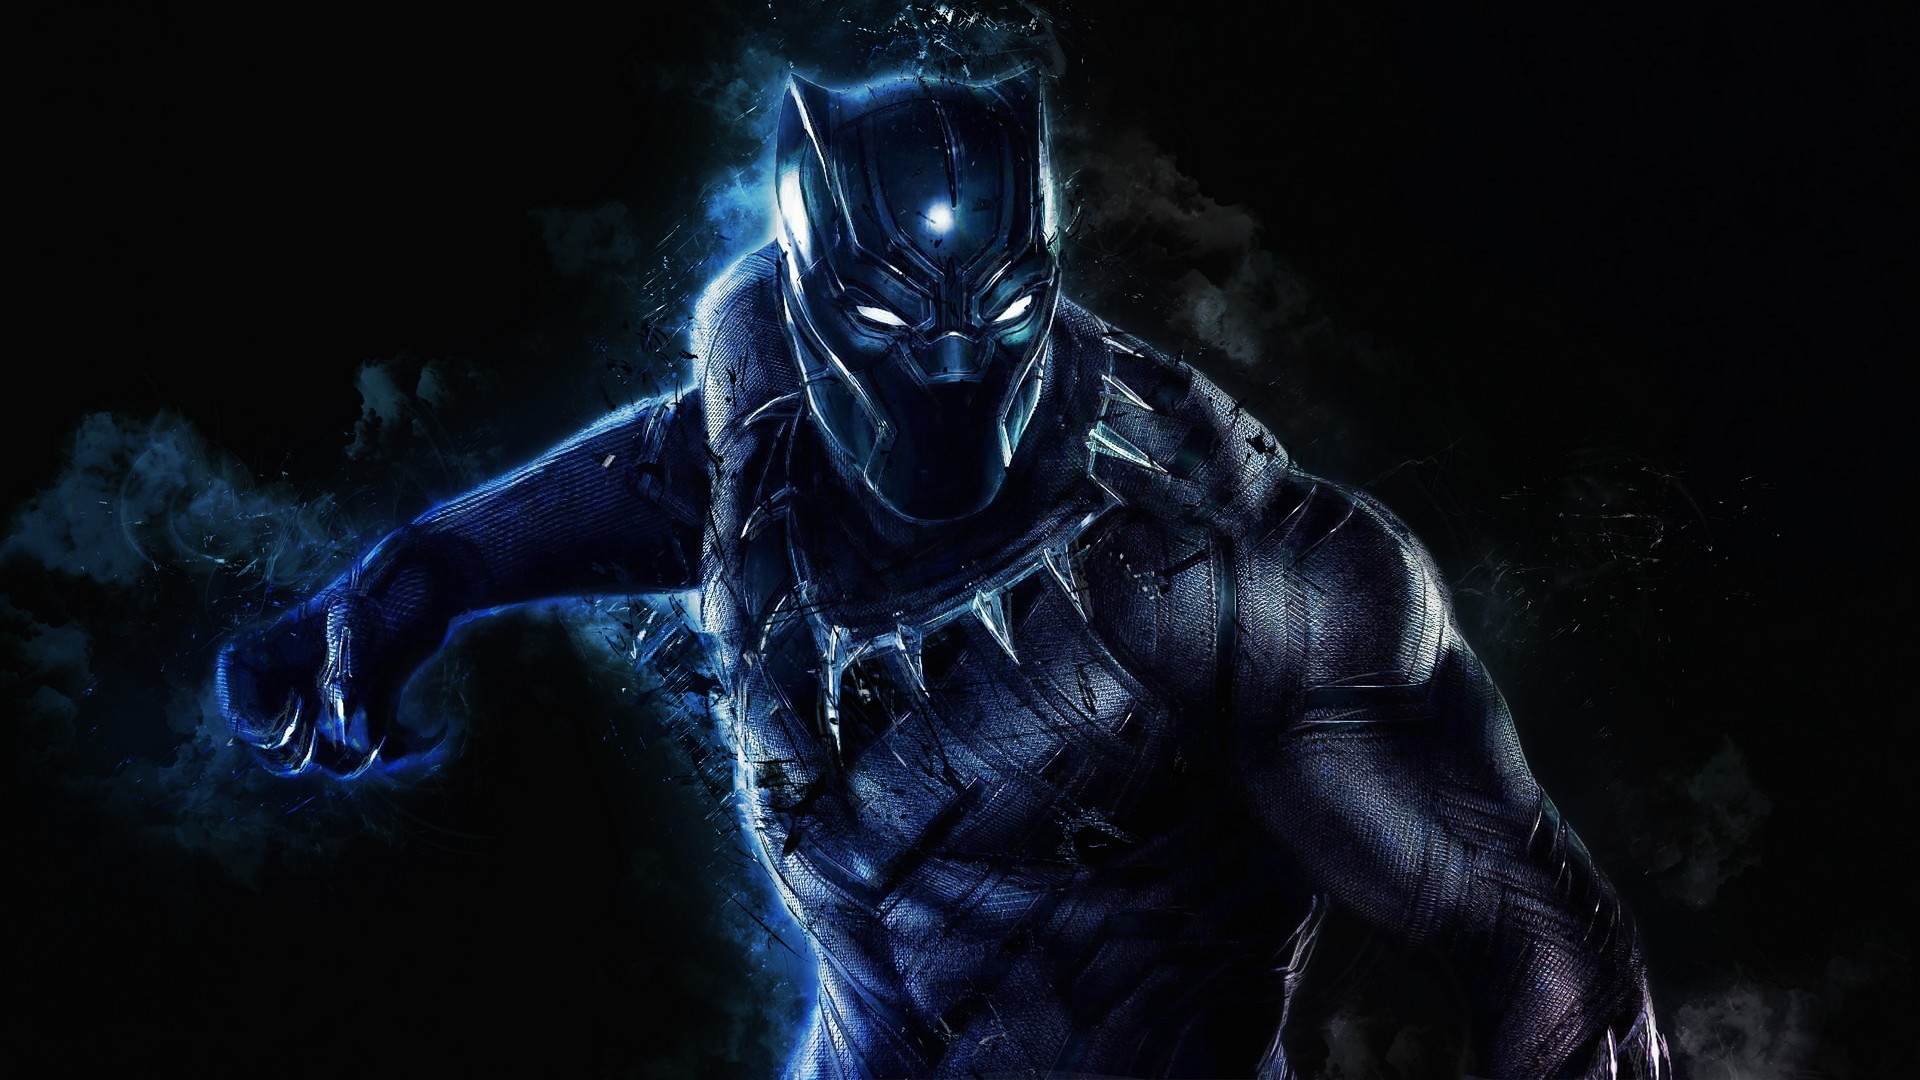 Black Panther Wallpaper with high-resolution 1920x1080 pixel. You can use this poster wallpaper for your Desktop Computers, Mac Screensavers, Windows Backgrounds, iPhone Wallpapers, Tablet or Android Lock screen and another Mobile device